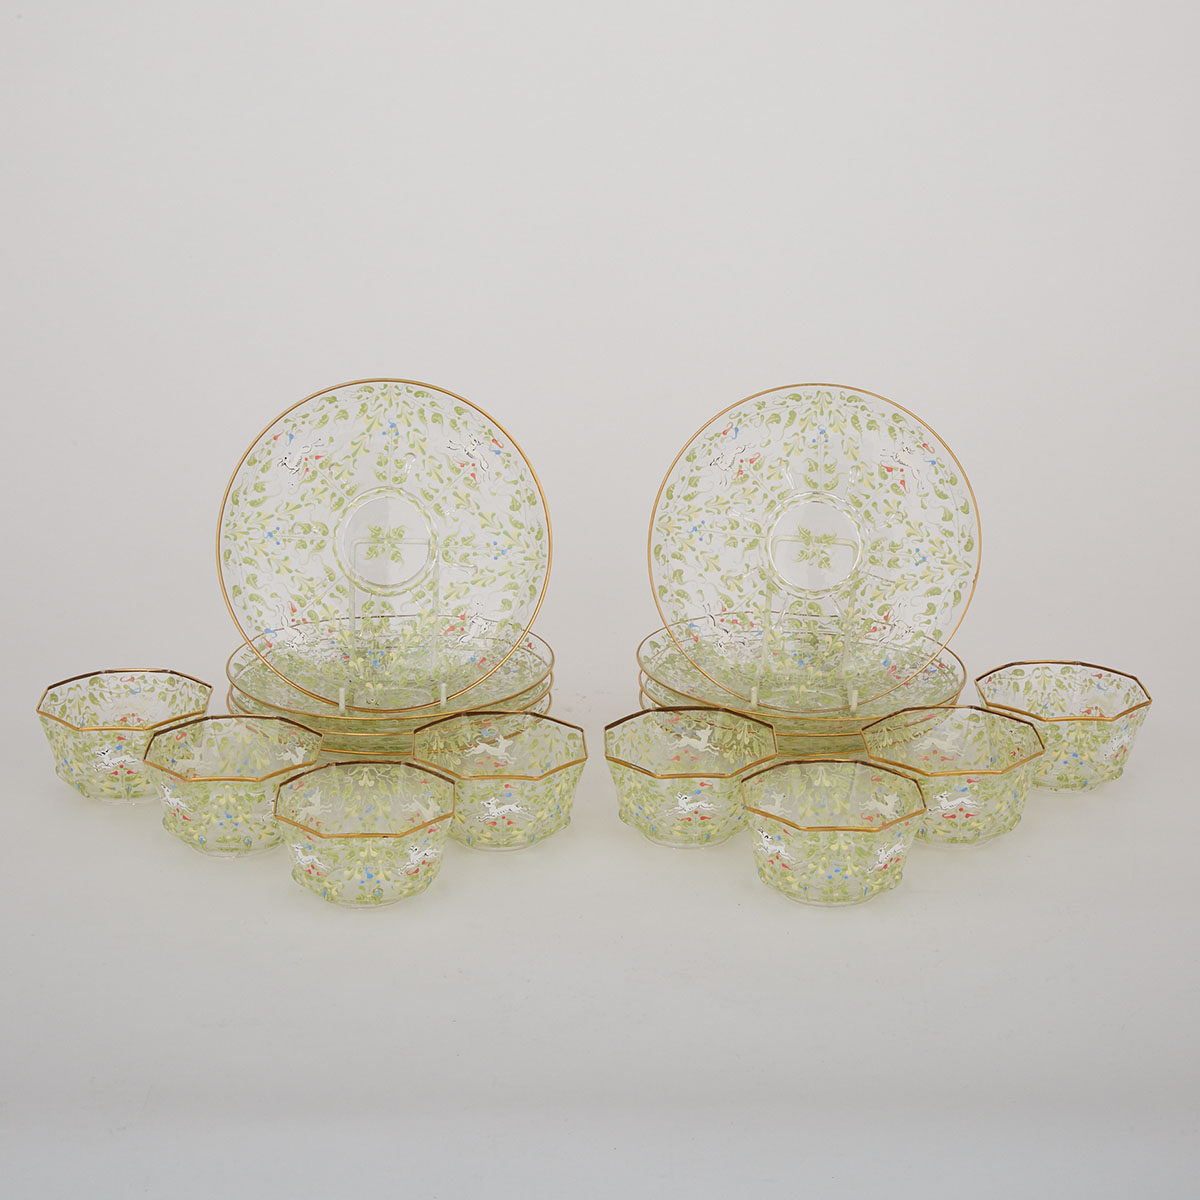 Eight Salviati Enameled and Gilt Glass Dessert Plates and Finger Bowls, 20th century